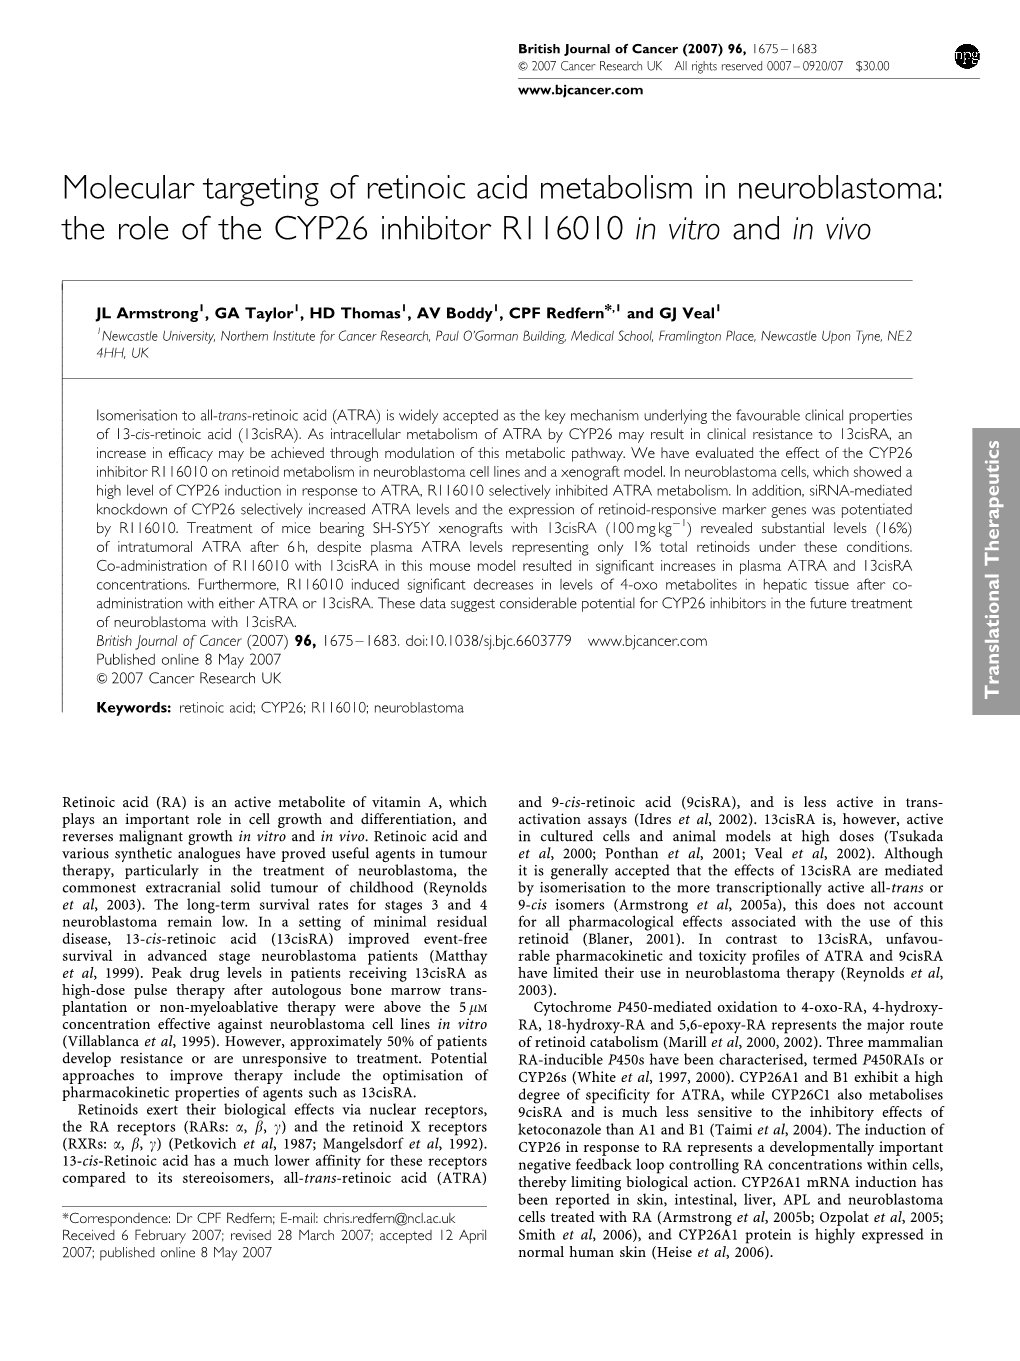 Molecular Targeting of Retinoic Acid Metabolism in Neuroblastoma: the Role of the CYP26 Inhibitor R116010 in Vitro and in Vivo